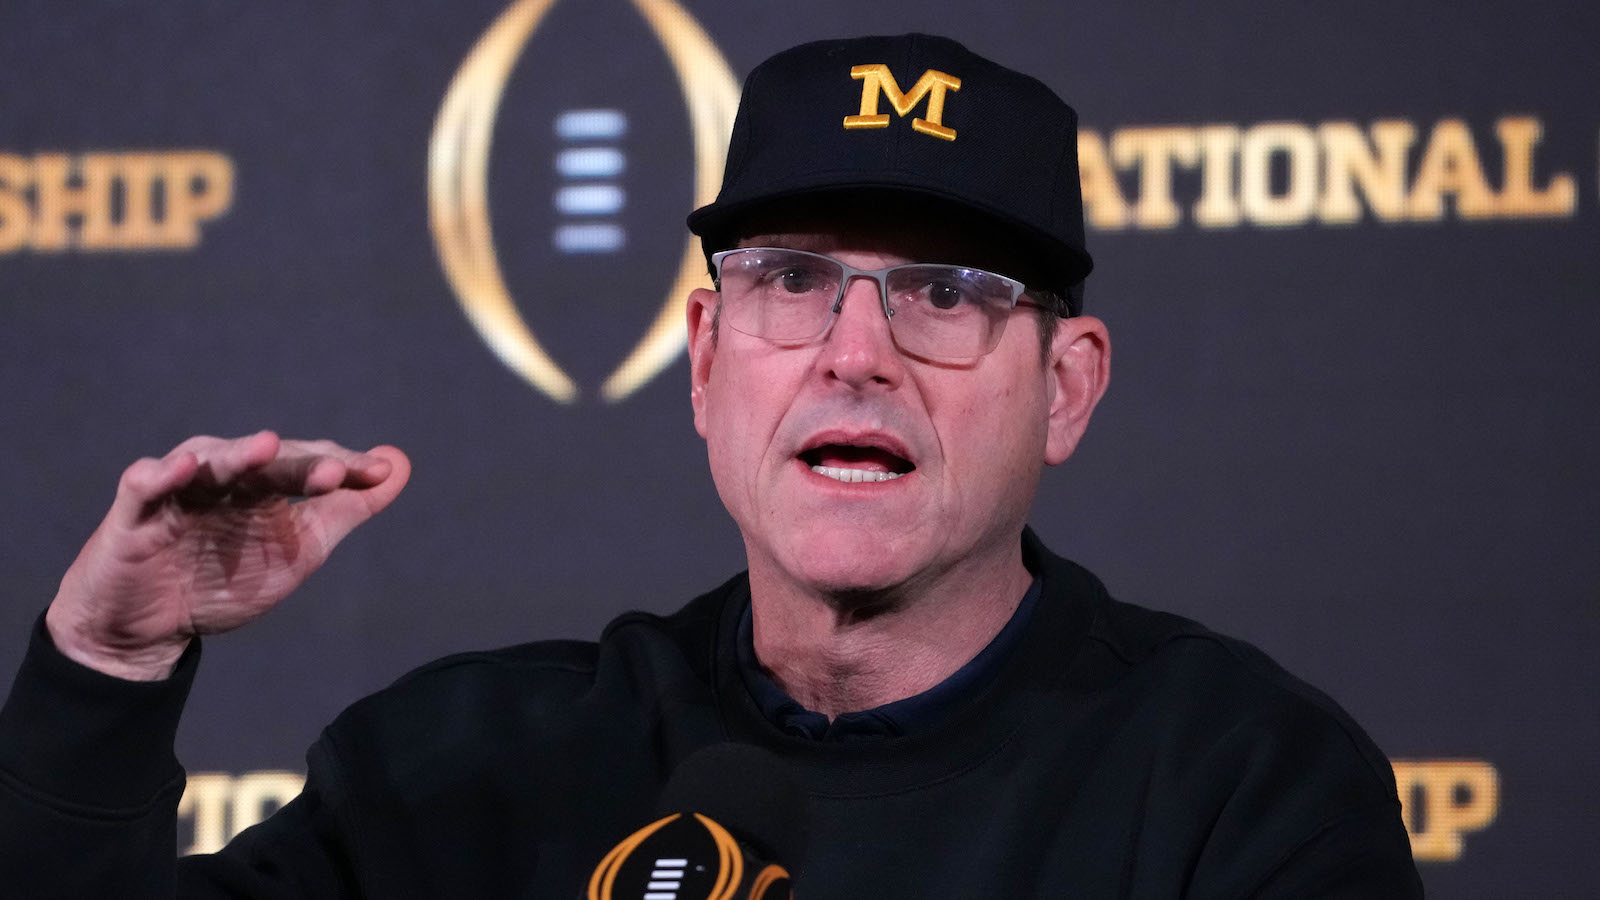 Jim Harbaugh led Michigan to an NCAA championship before becoming Los Angeles Chargers coach